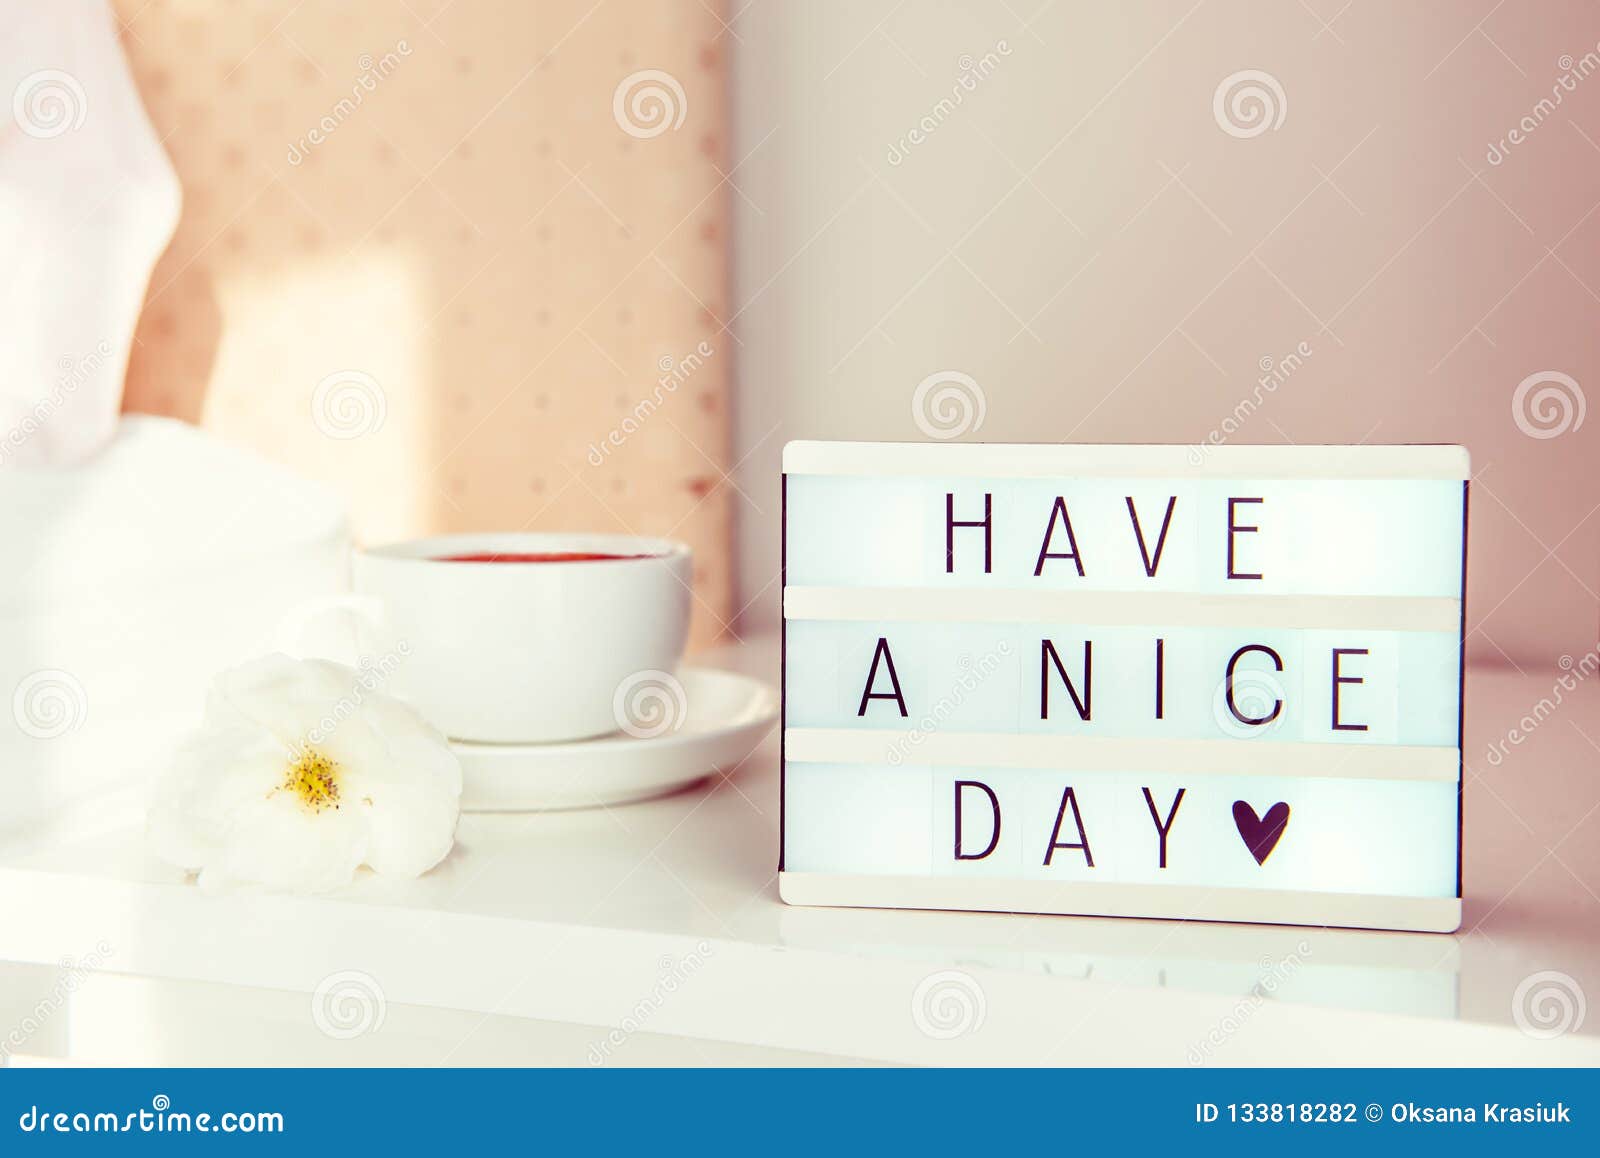 Have a Nice Day Text Message on Lighted Box, Cup of Coffee and ...